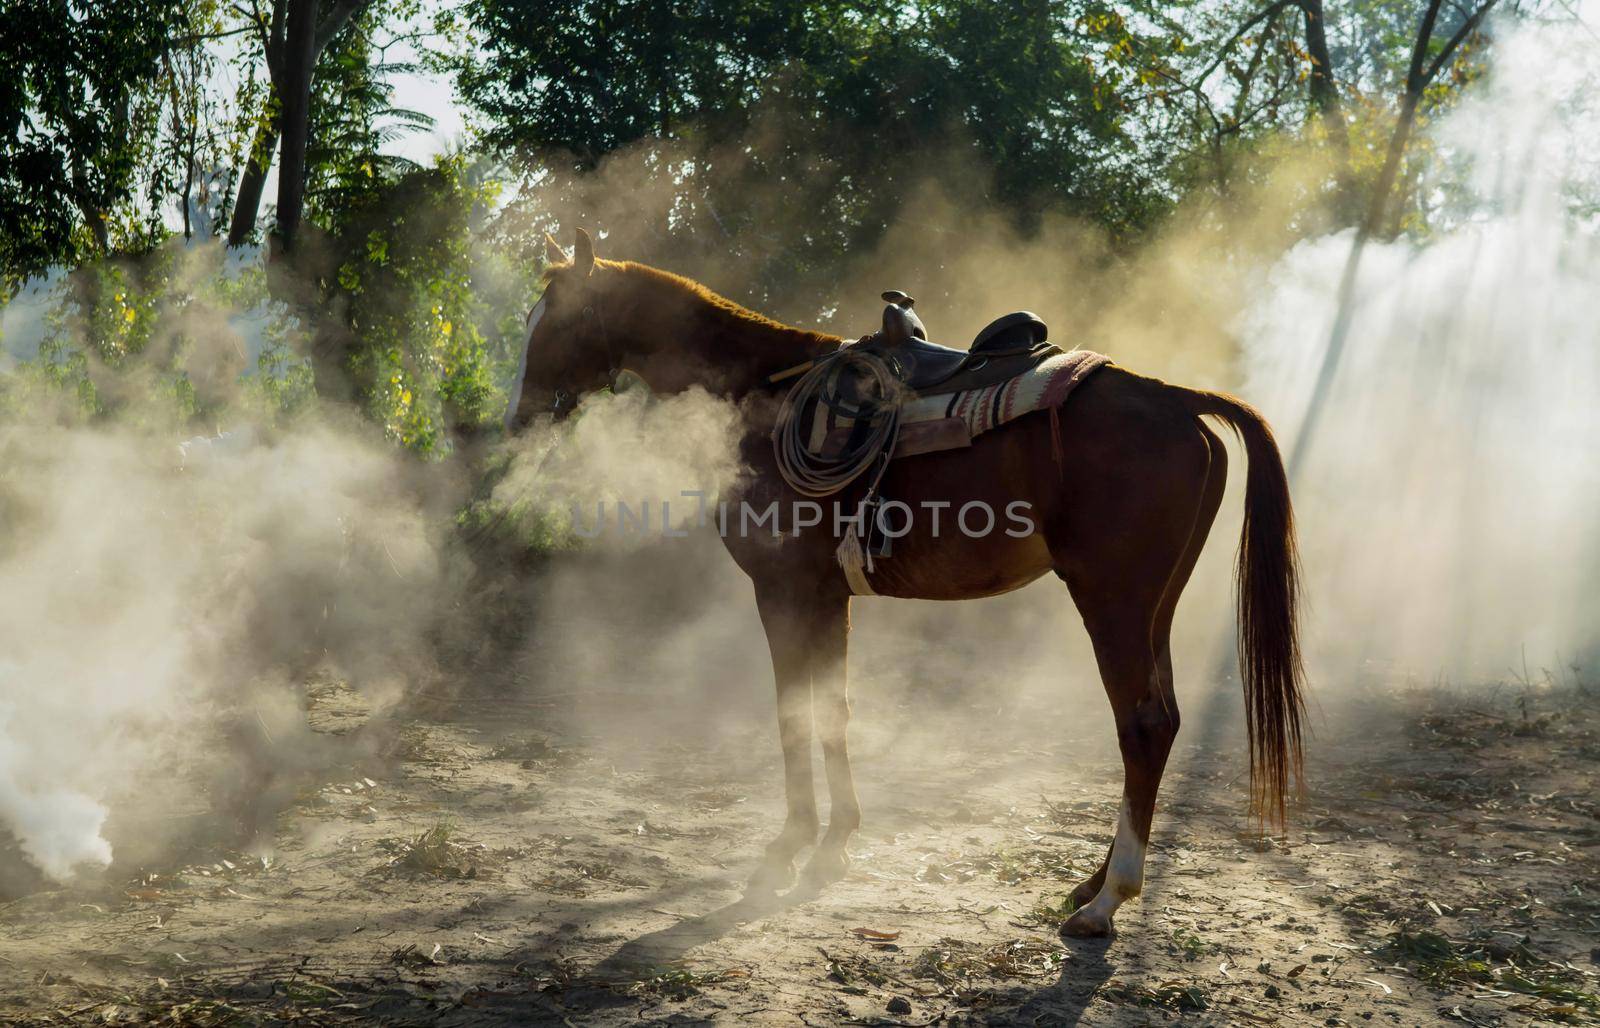 Rider as cowboy outfit costume with a horses and a gun held in the hand against smoke and sunset background by chuanchai